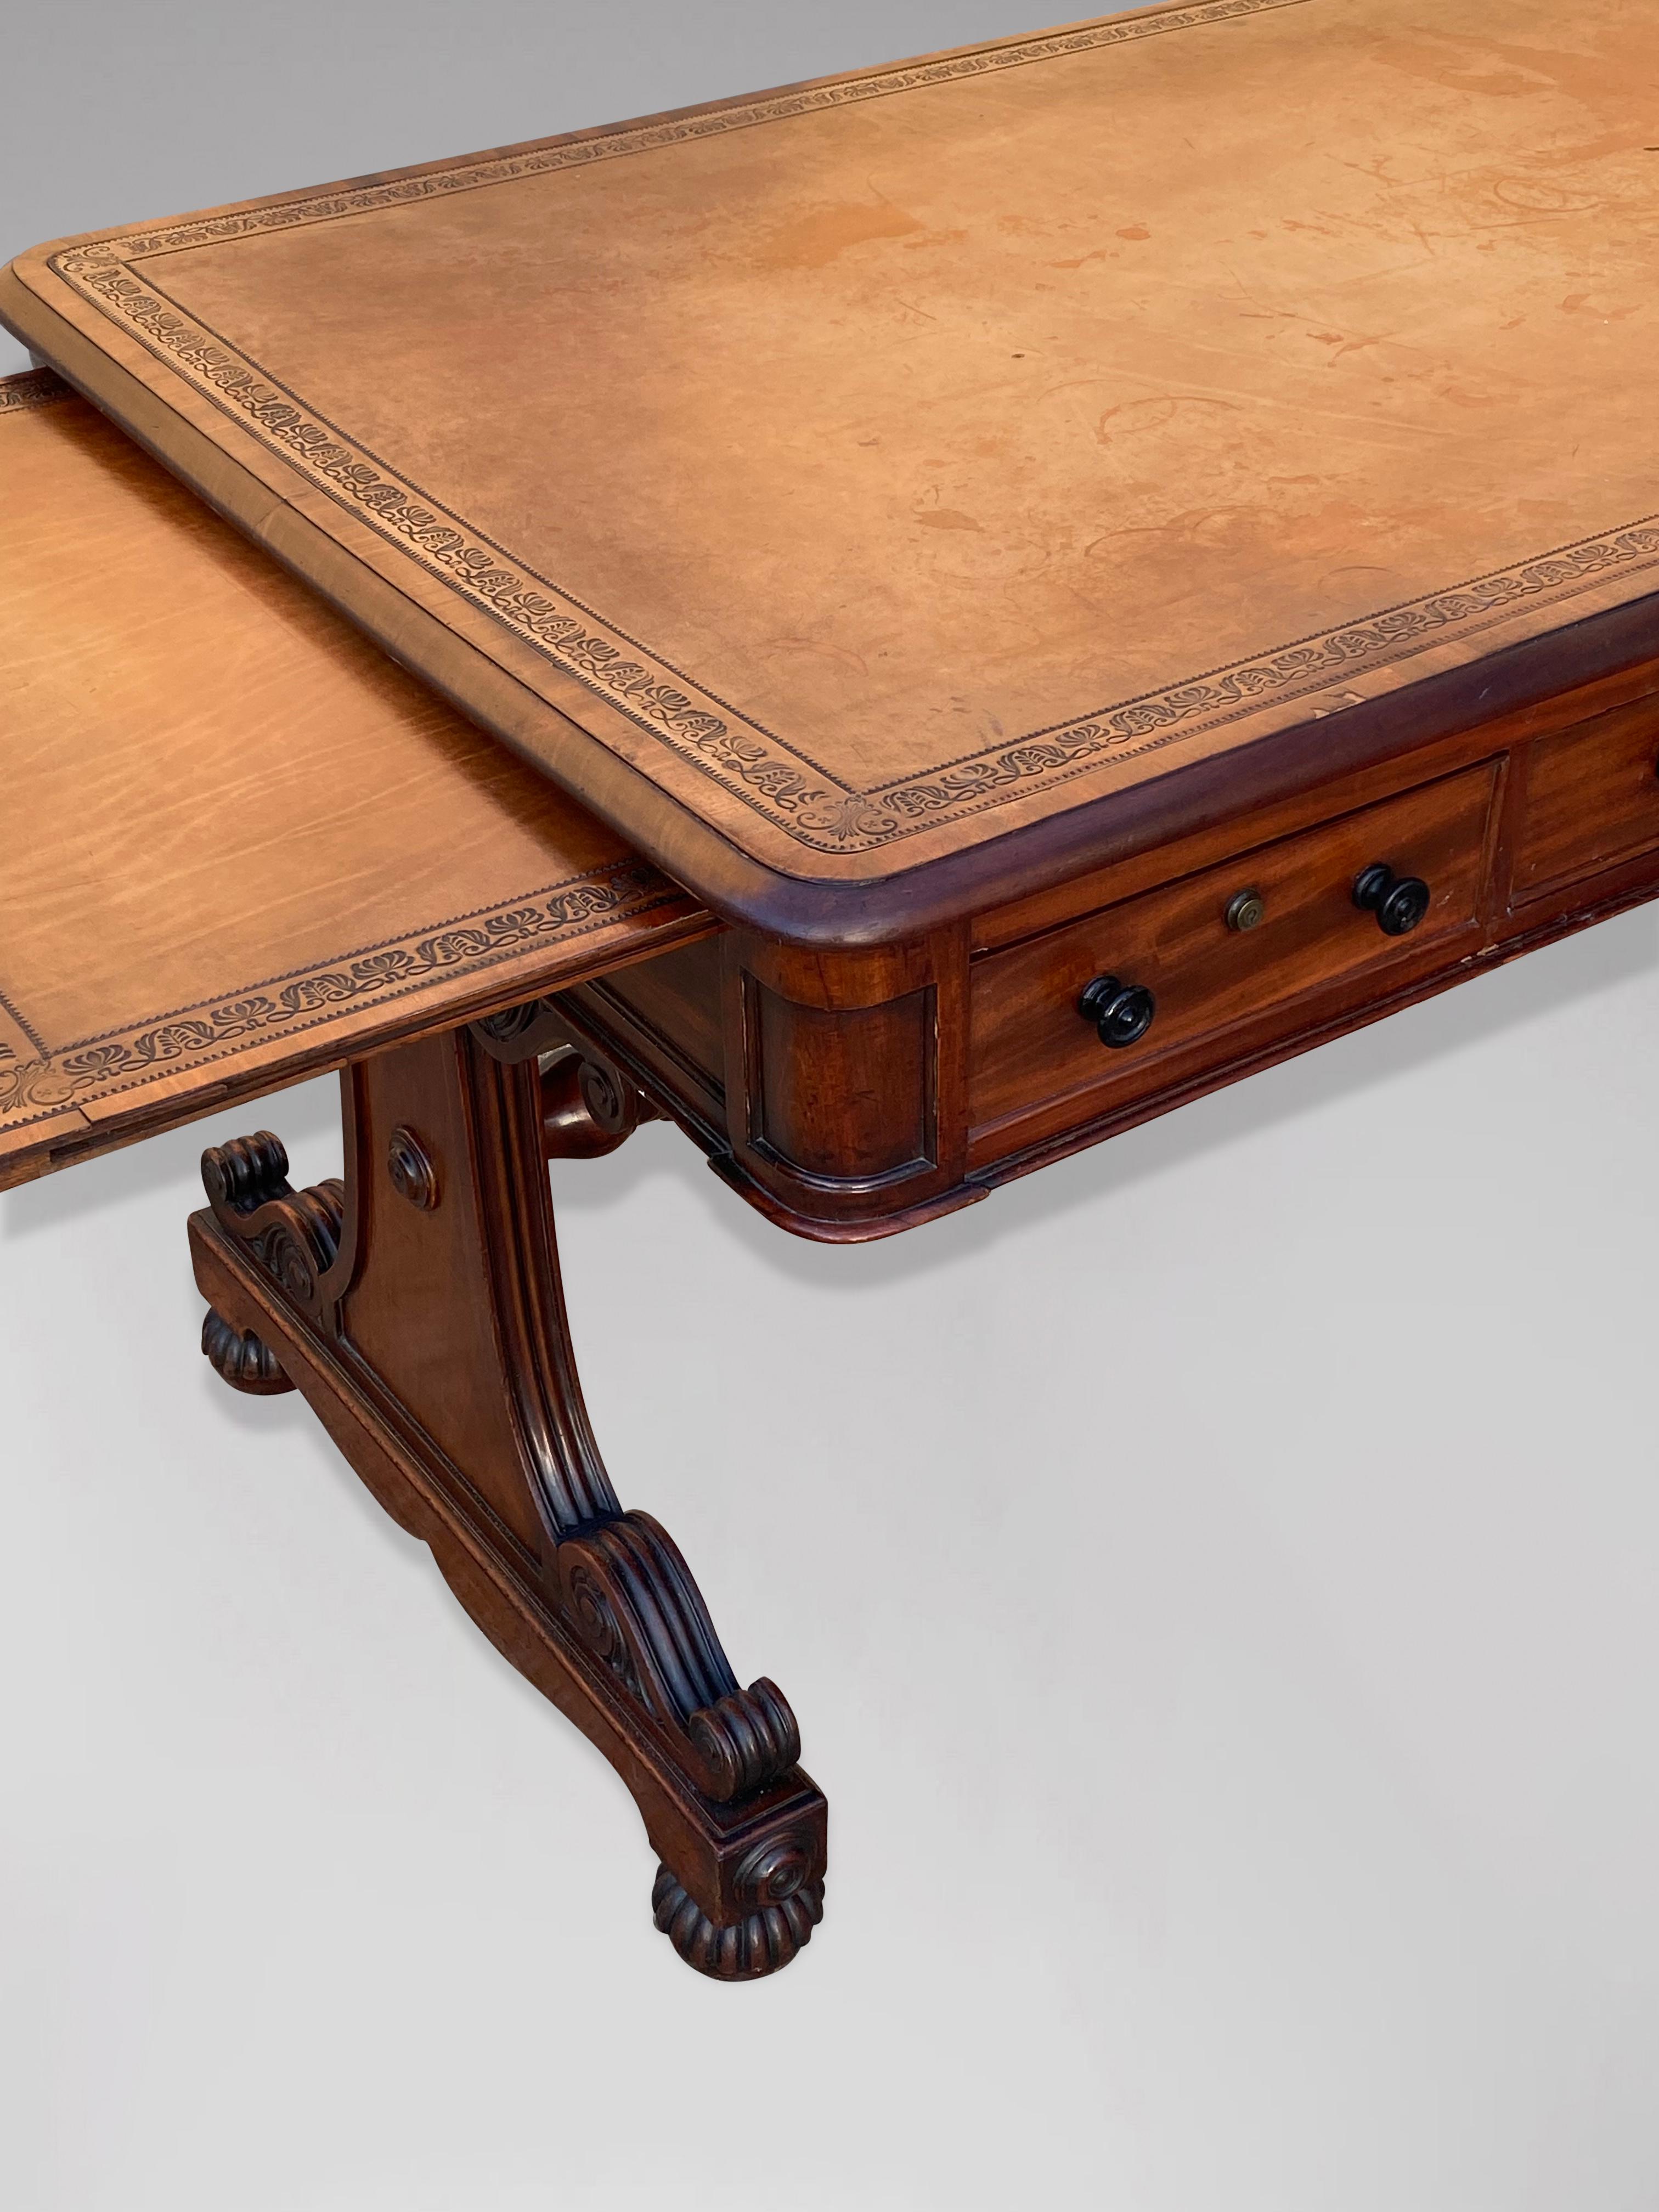 19th Century William IV Period Mahogany Partners Writing Table In Good Condition In Petworth,West Sussex, GB